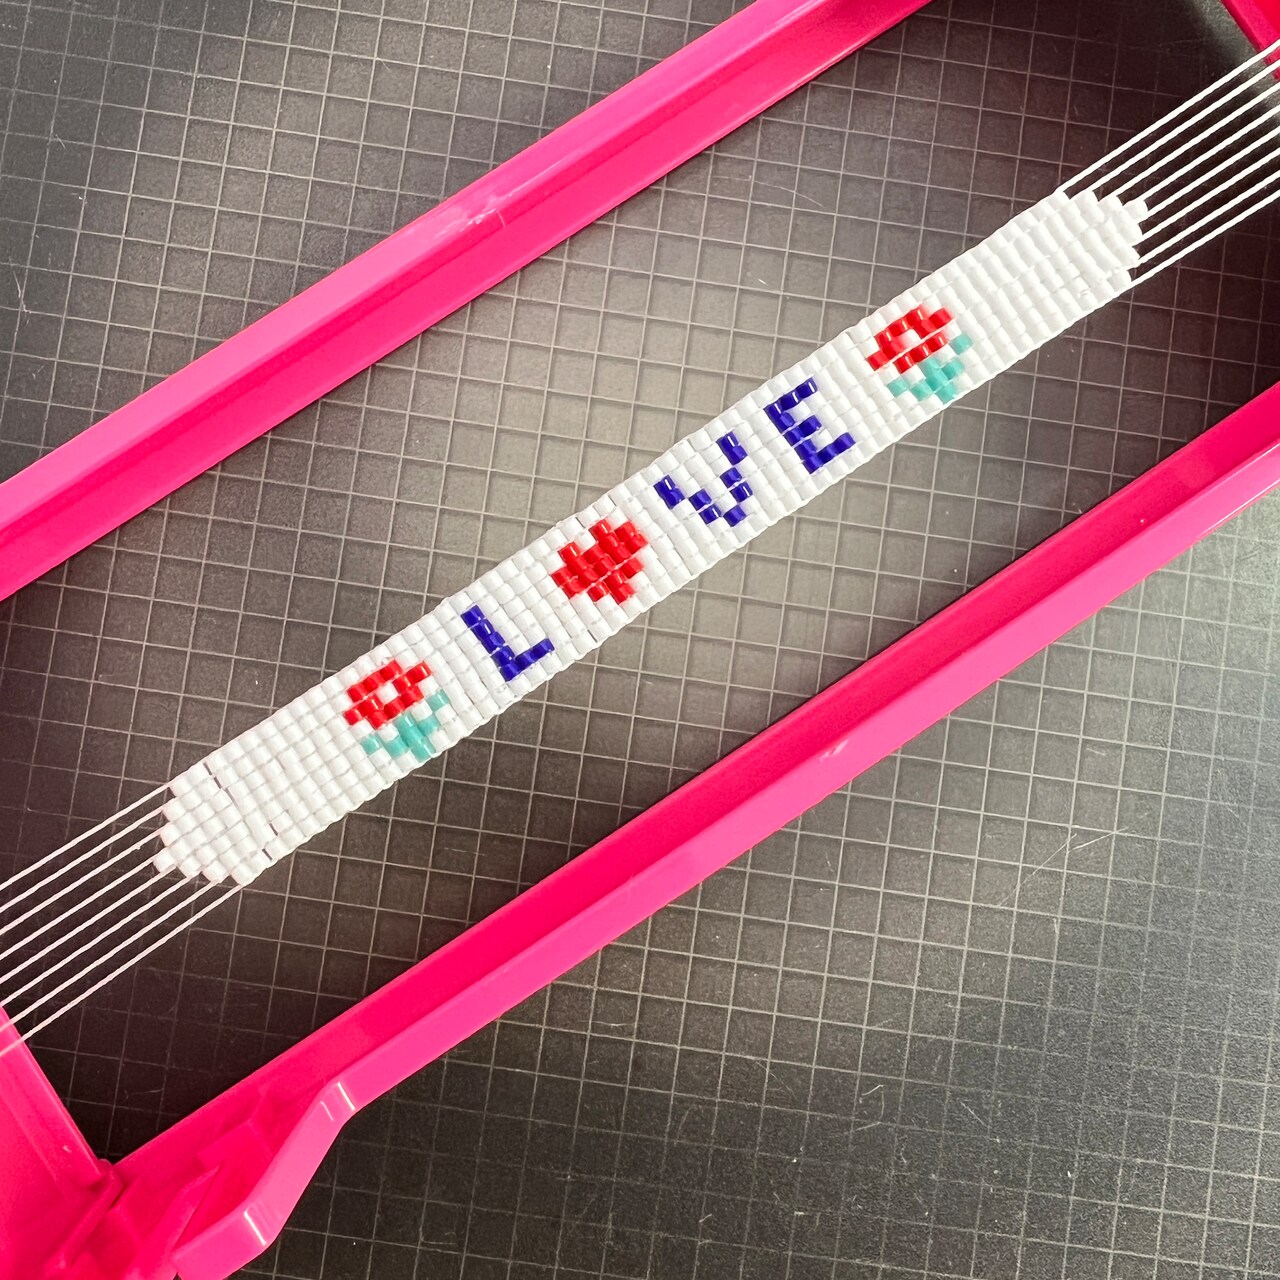 Week of Jewelry Making: Learn Loom Weaving with The Beadsmith®